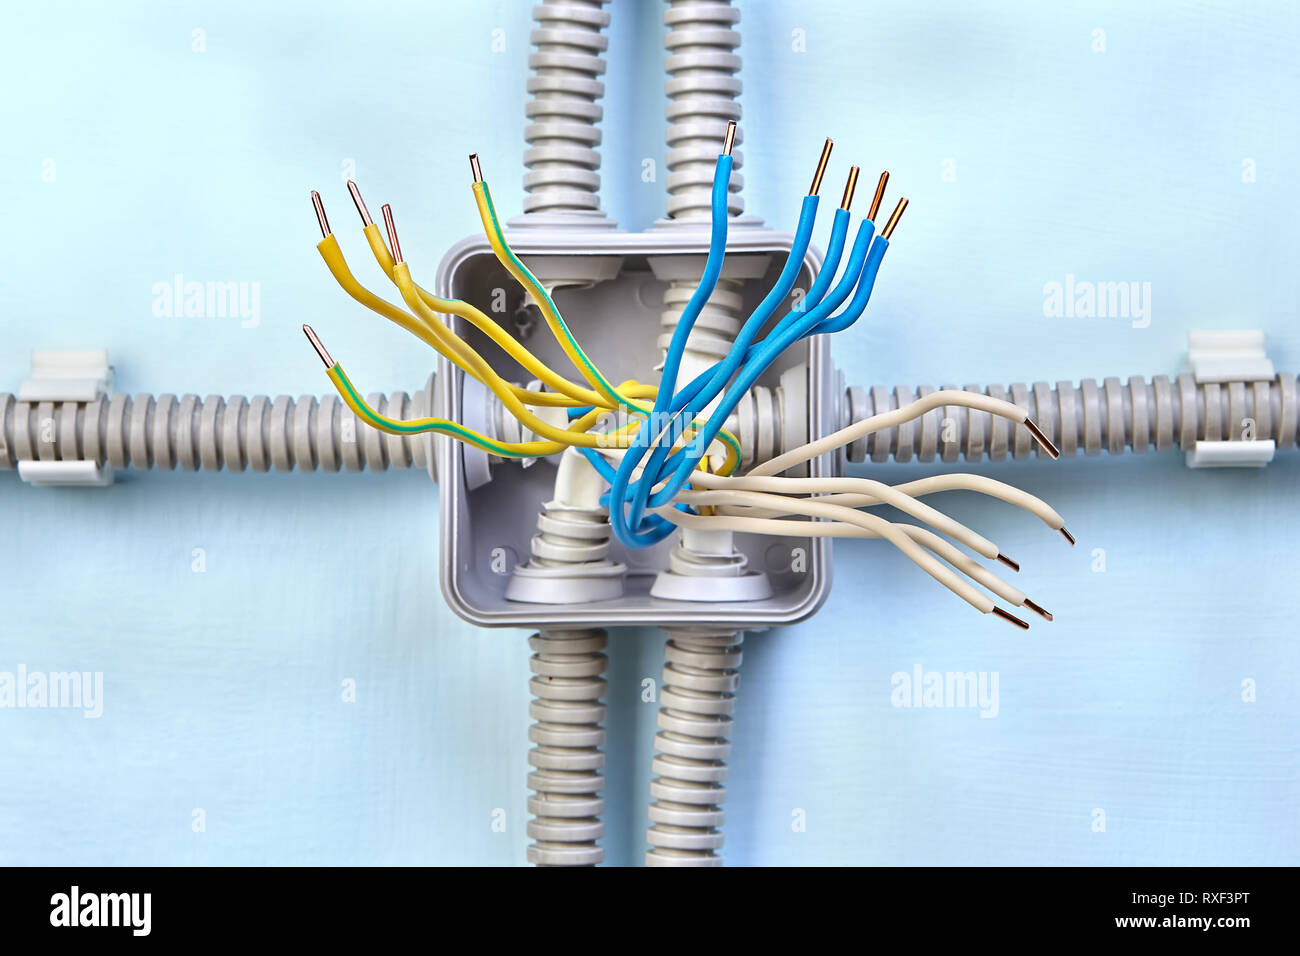 Copper wiring of new electrical junction box, process of installing surface mounted wiring, close up. Stock Photo